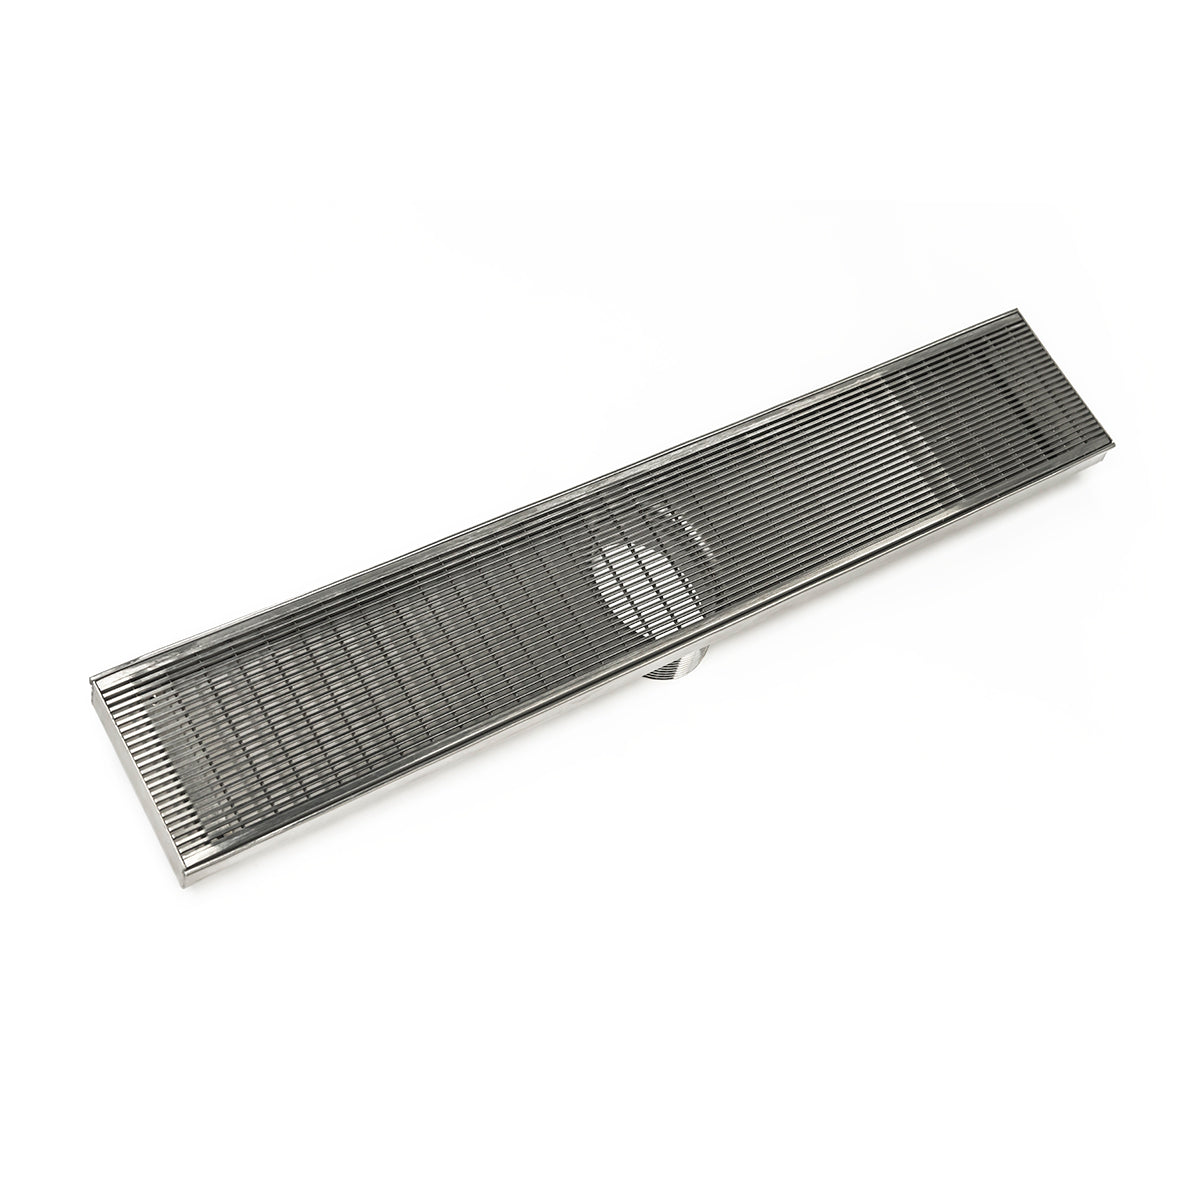 Infinity Drain 42" FX Series High Flow Fixed Length Linear Drain Kit with Wedge Wire Grate with Cast Iron Drain Body